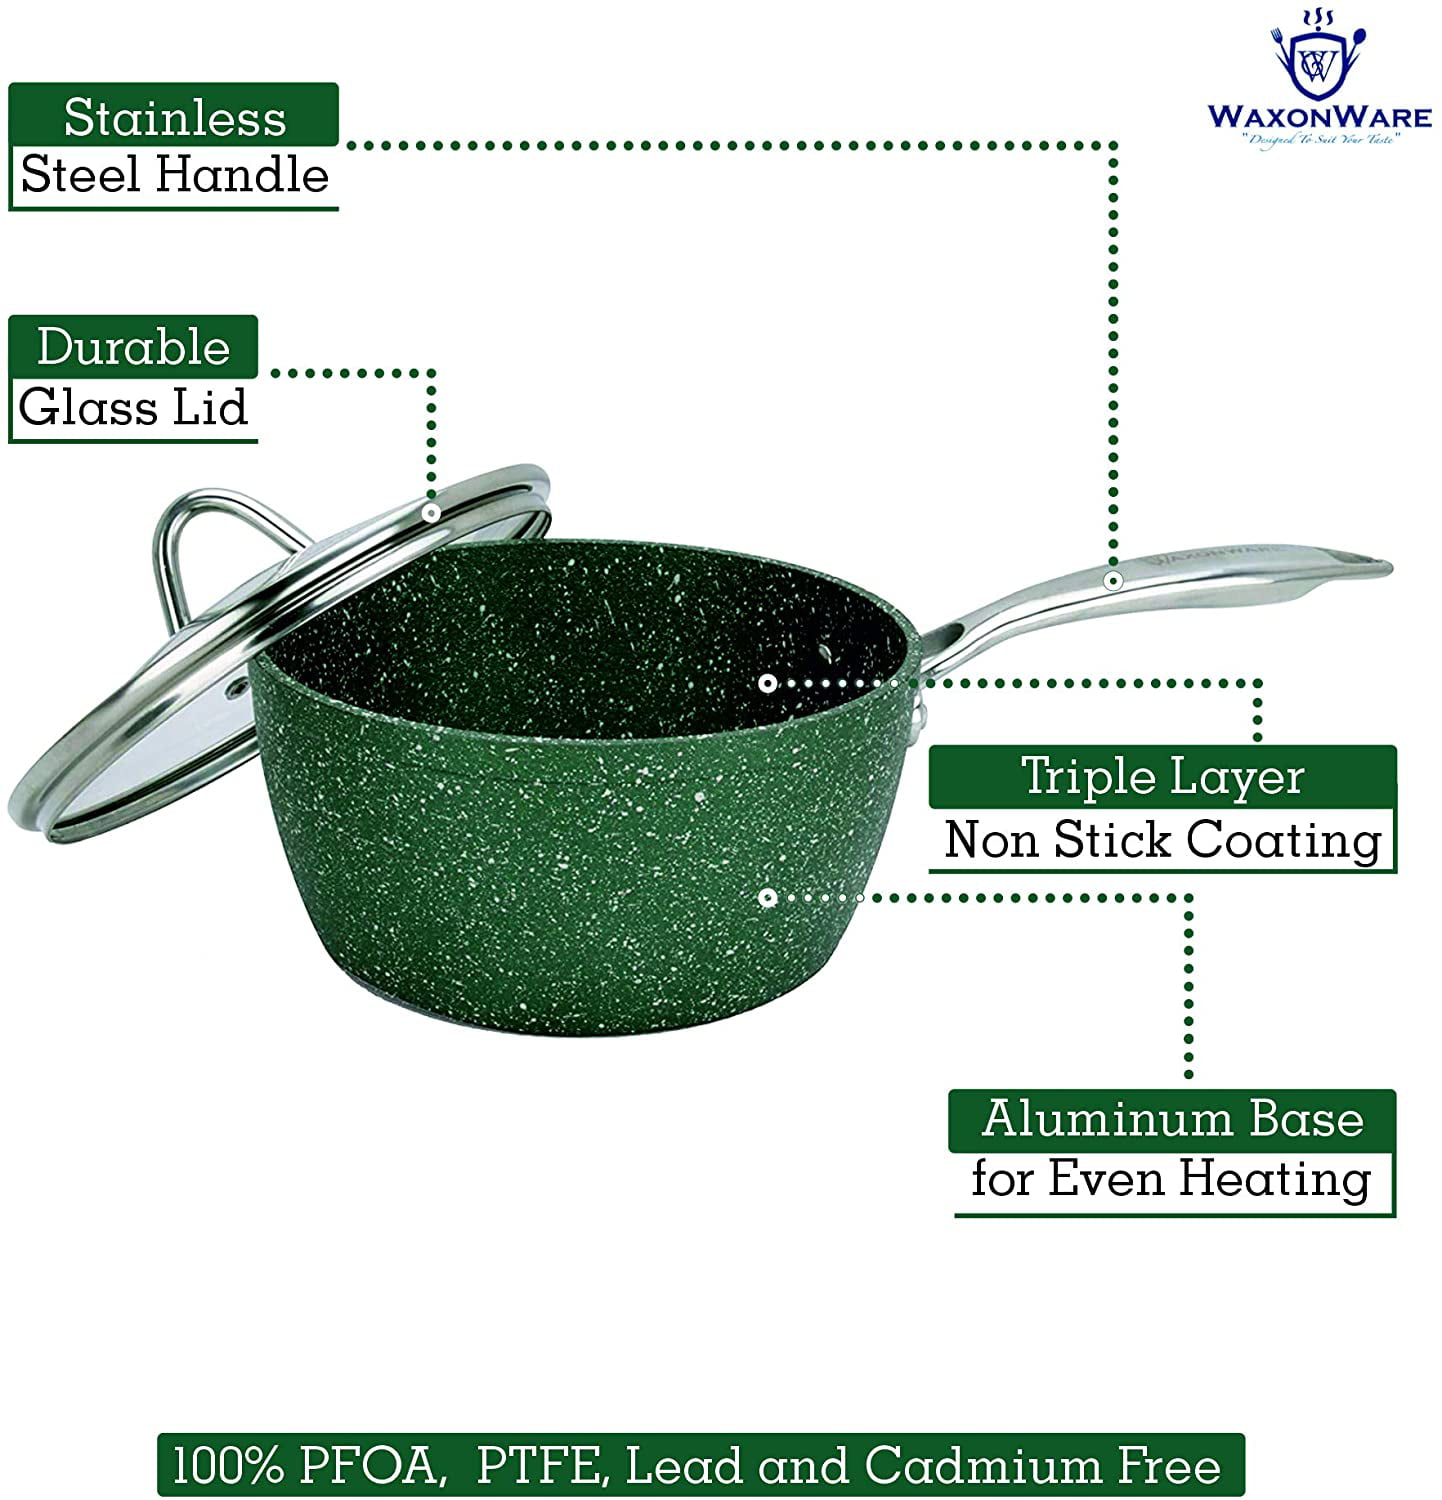 Dishwasher & Oven Safe WaxonWare 2.5 Quart Stone Nonstick Saucepan With Glass Lid Scratch Resistant Non Toxic APEO PFOA Free Nonstick Cookware Cooking Pot EMERALD Series Induction Compatible